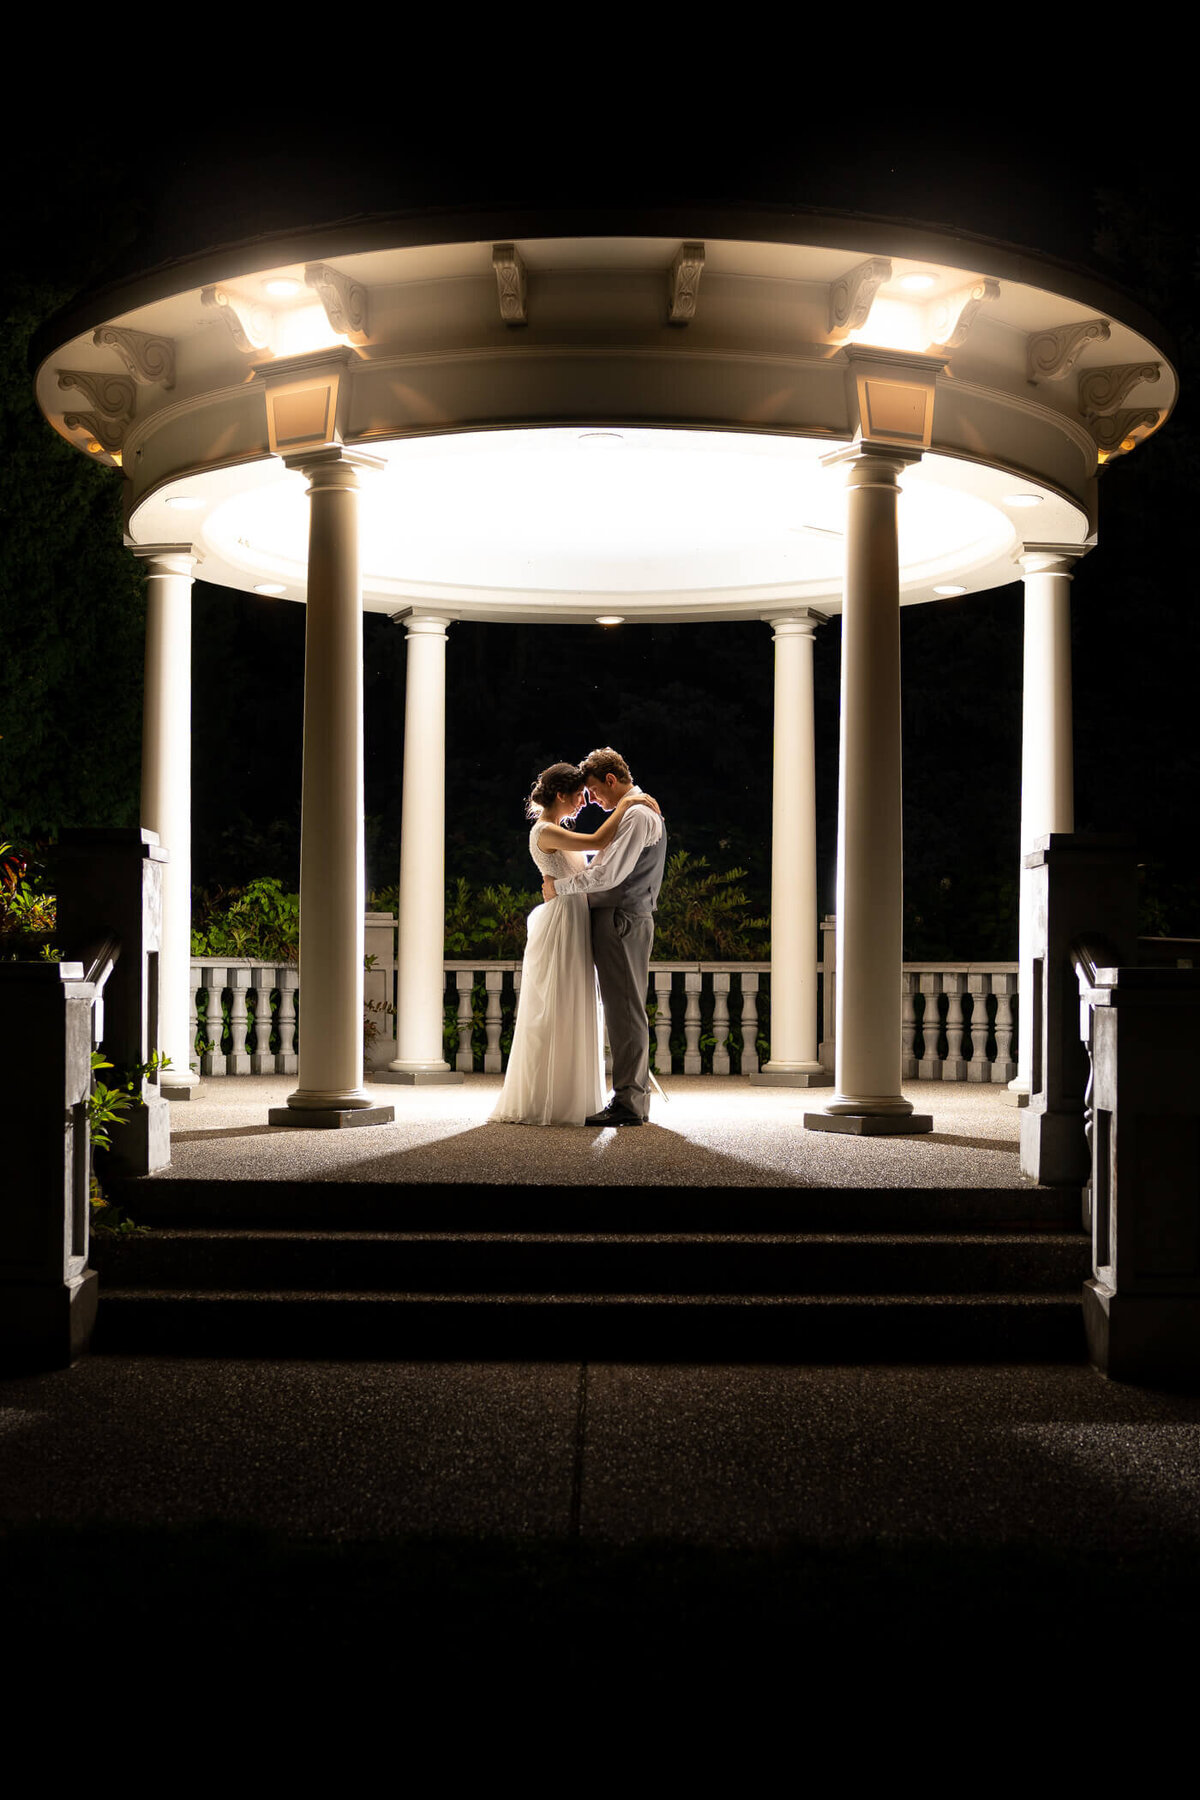 Couple dances under the light of a gazebo at night during their wedding in Beaver PA.